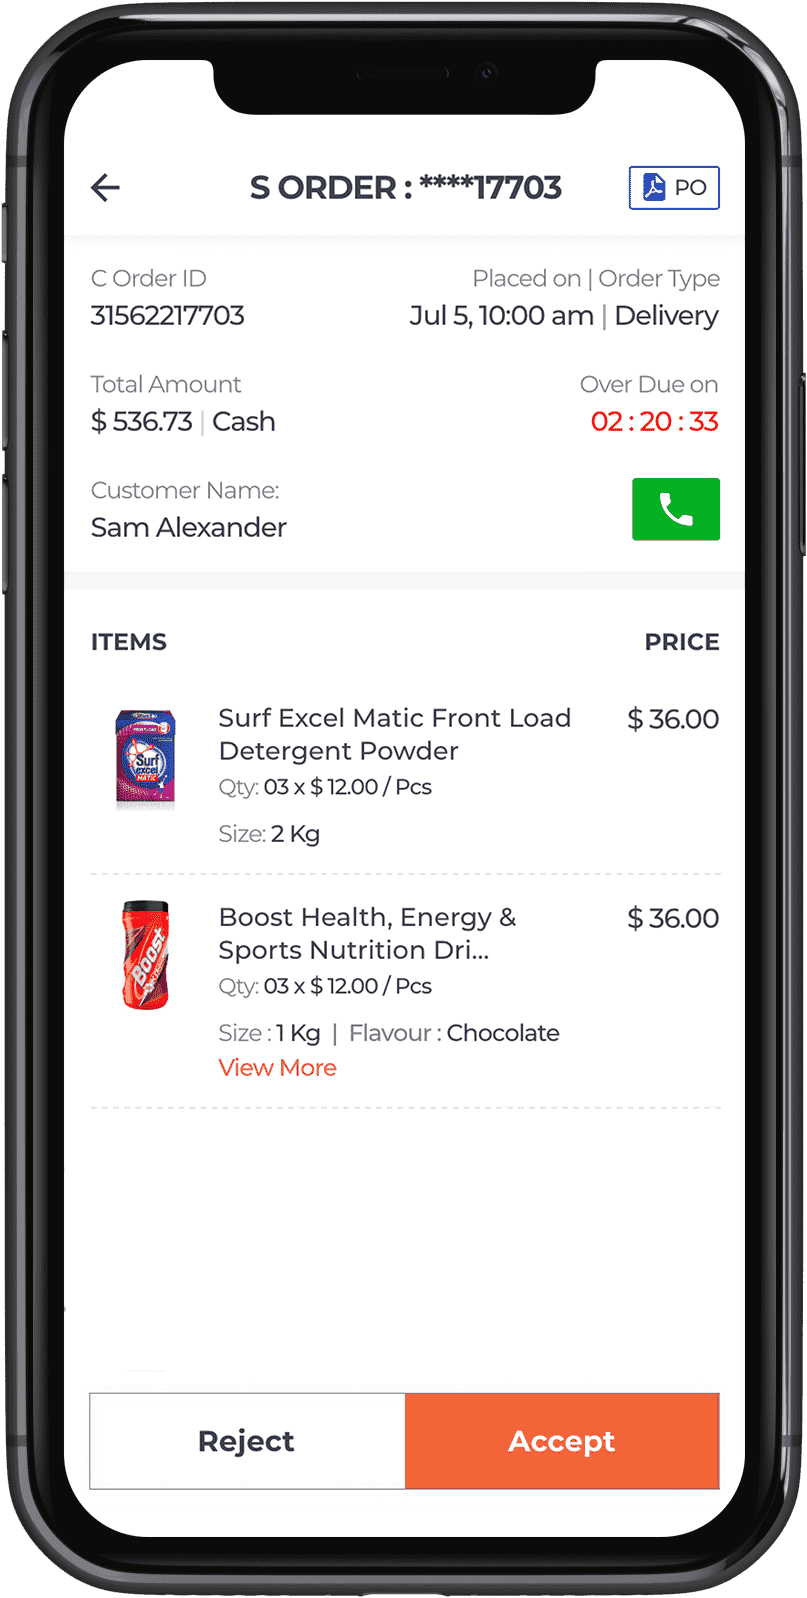 order-details-page-in-grocery-delivery-picker-app.png